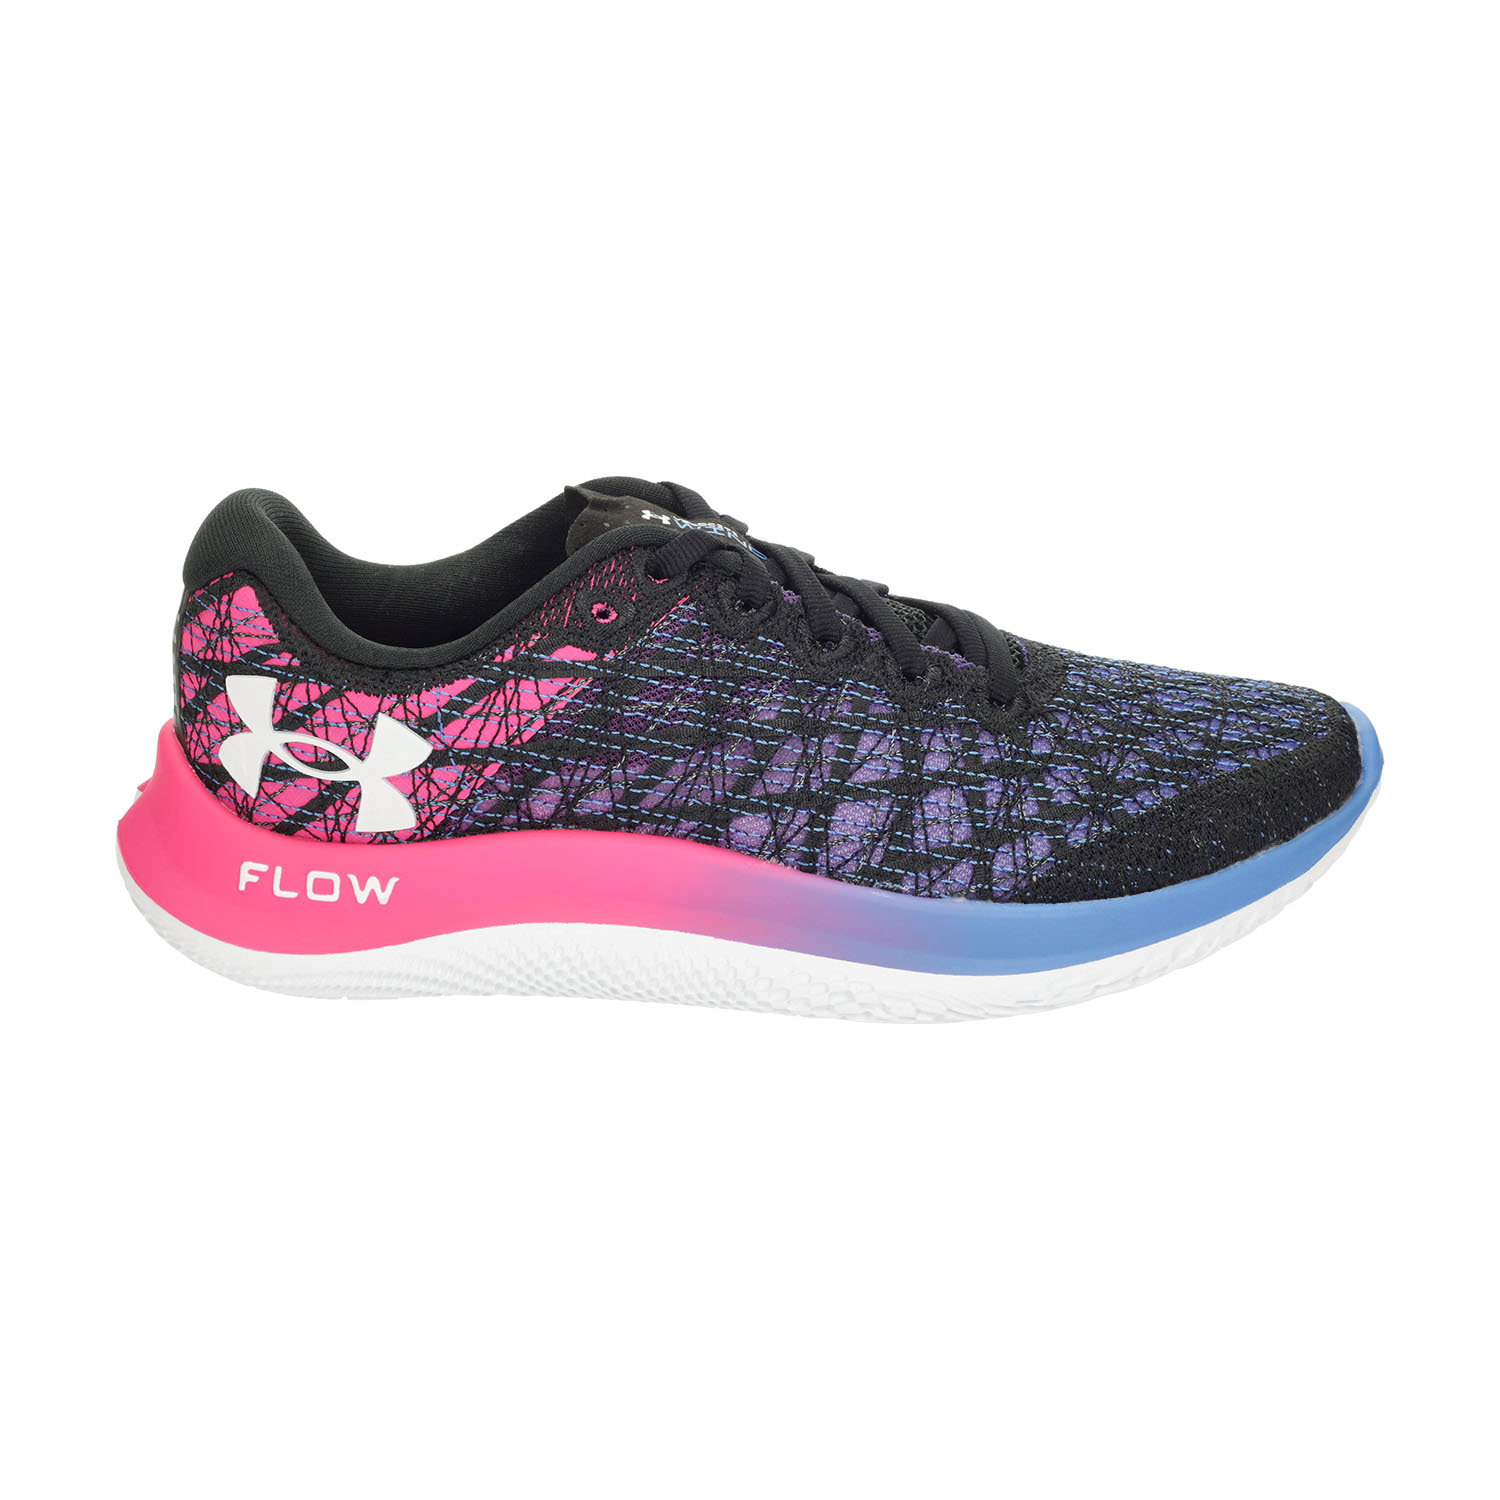 Cheap range Under Armour Flow Velociti Wind Womens Running Shoes ...